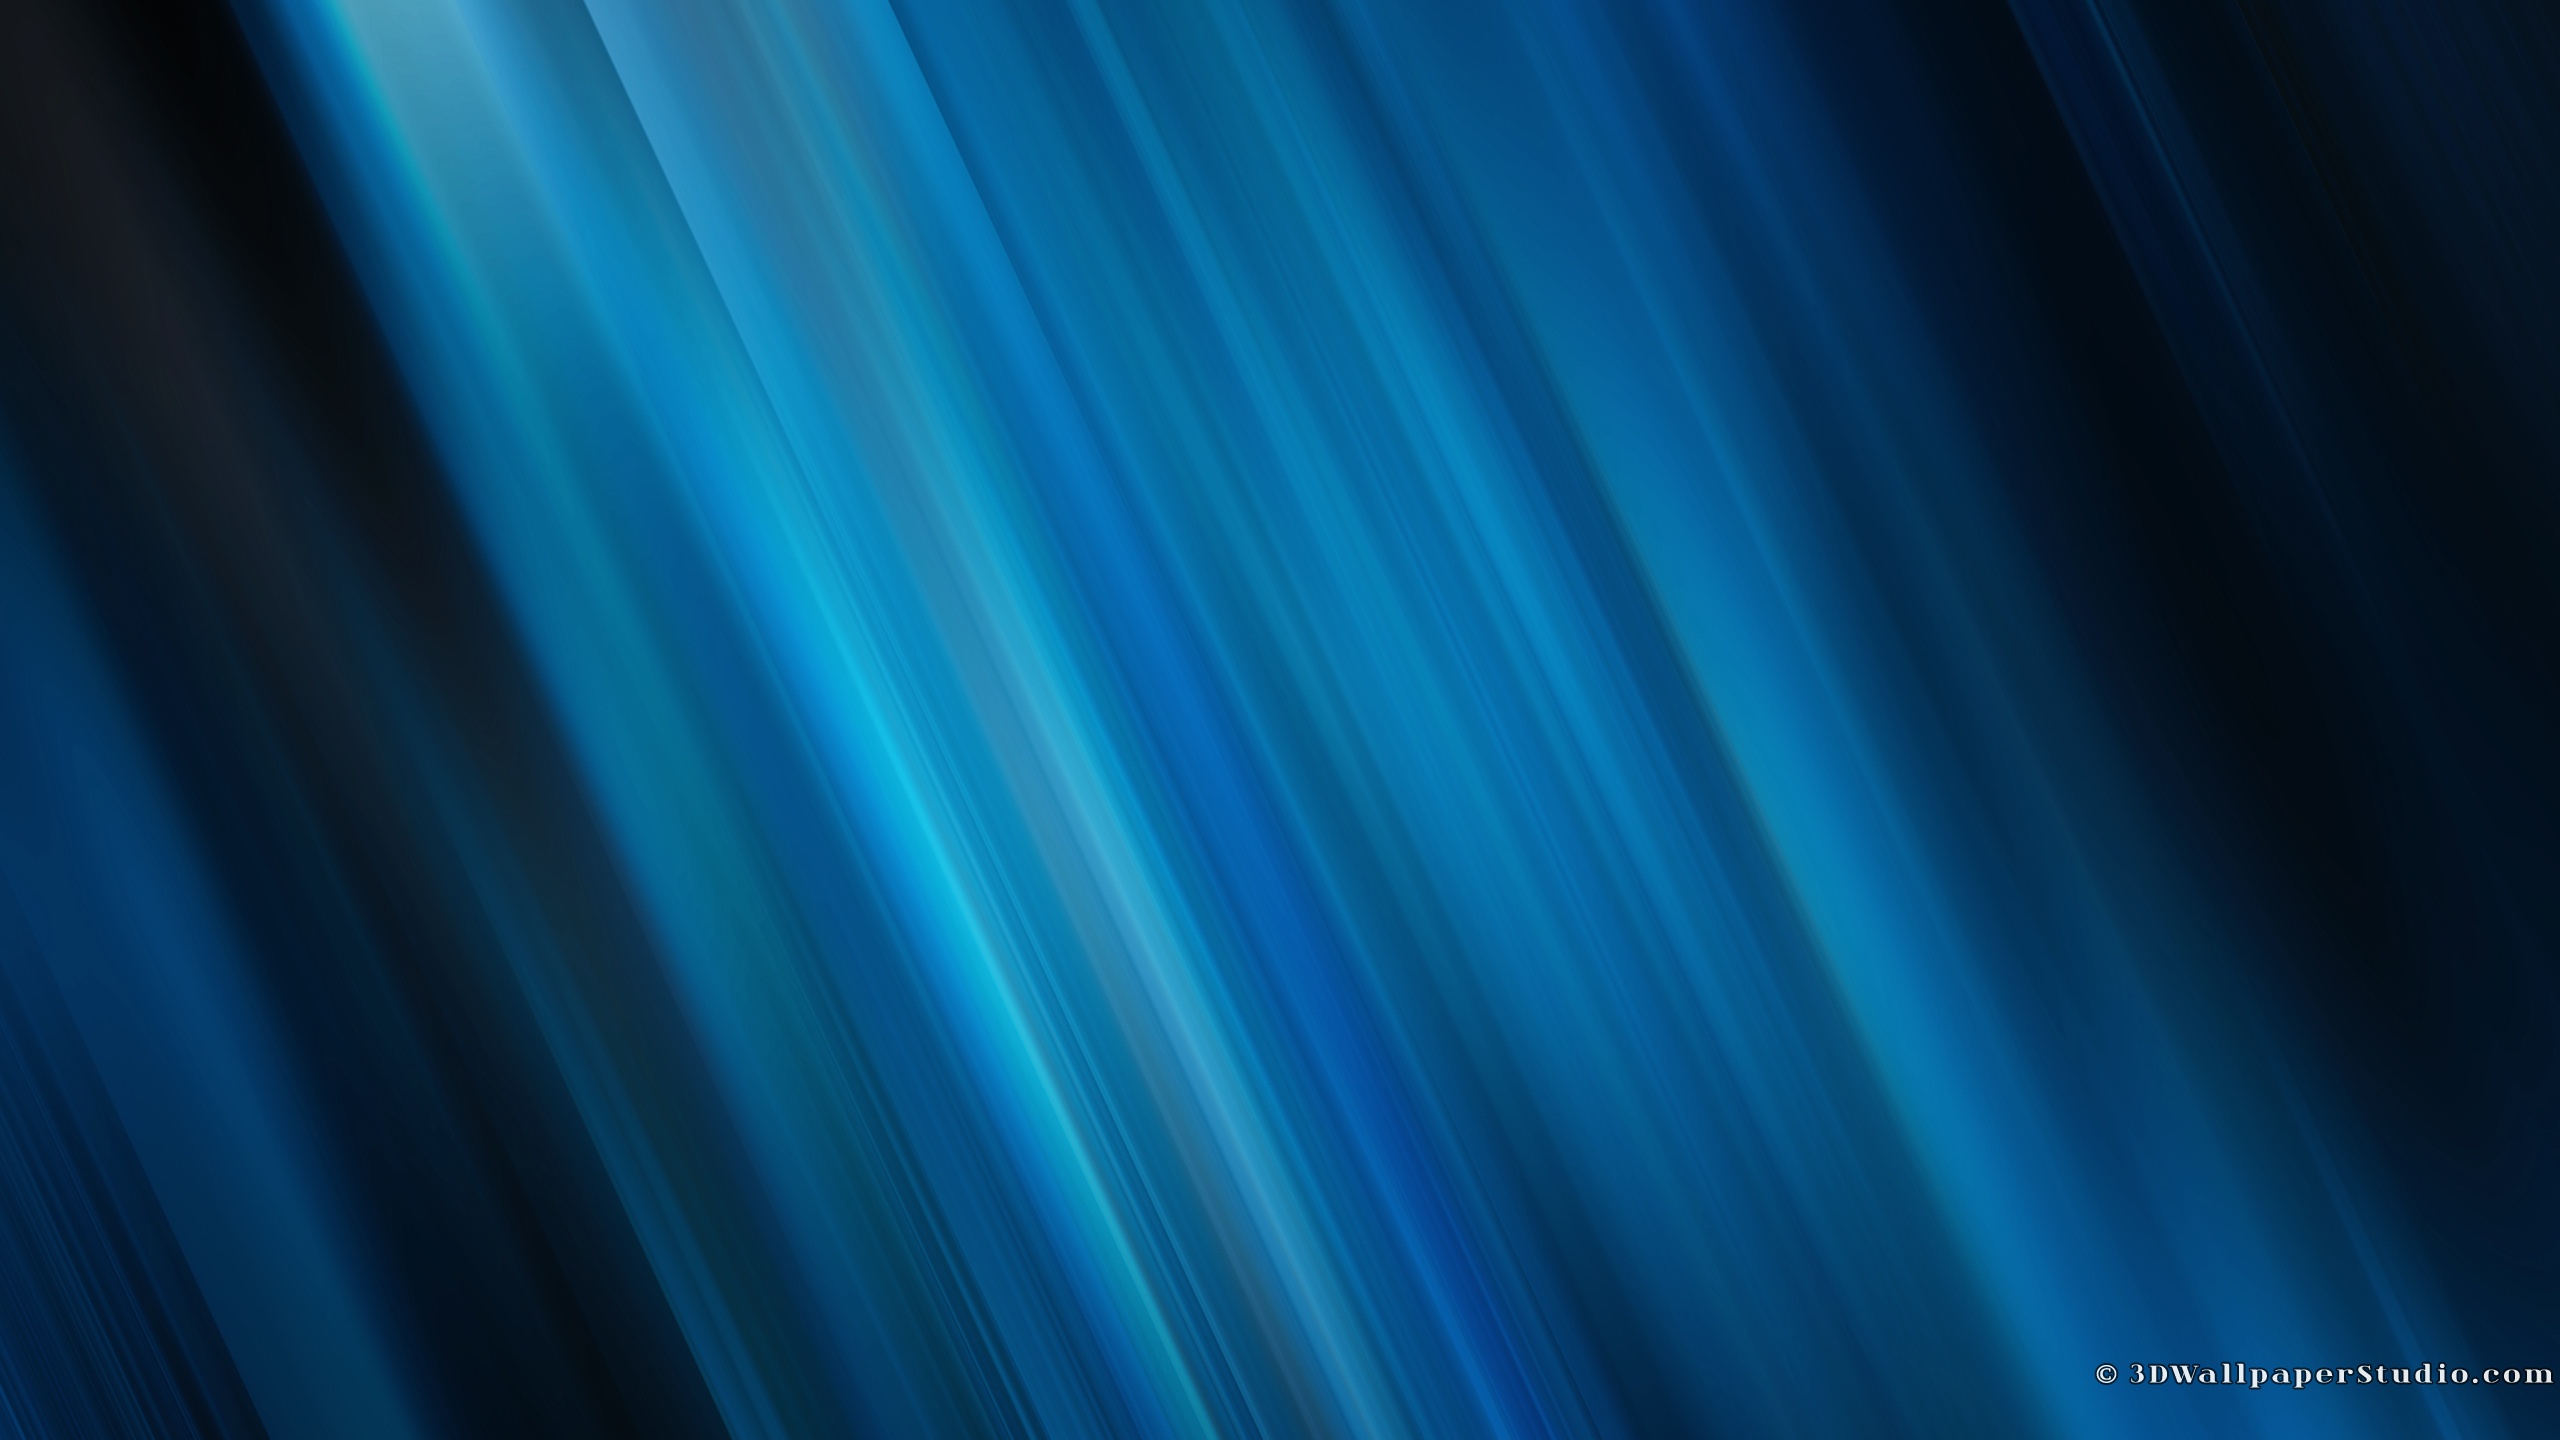 Awesome Blue Backgrounds - WallpaperSafari